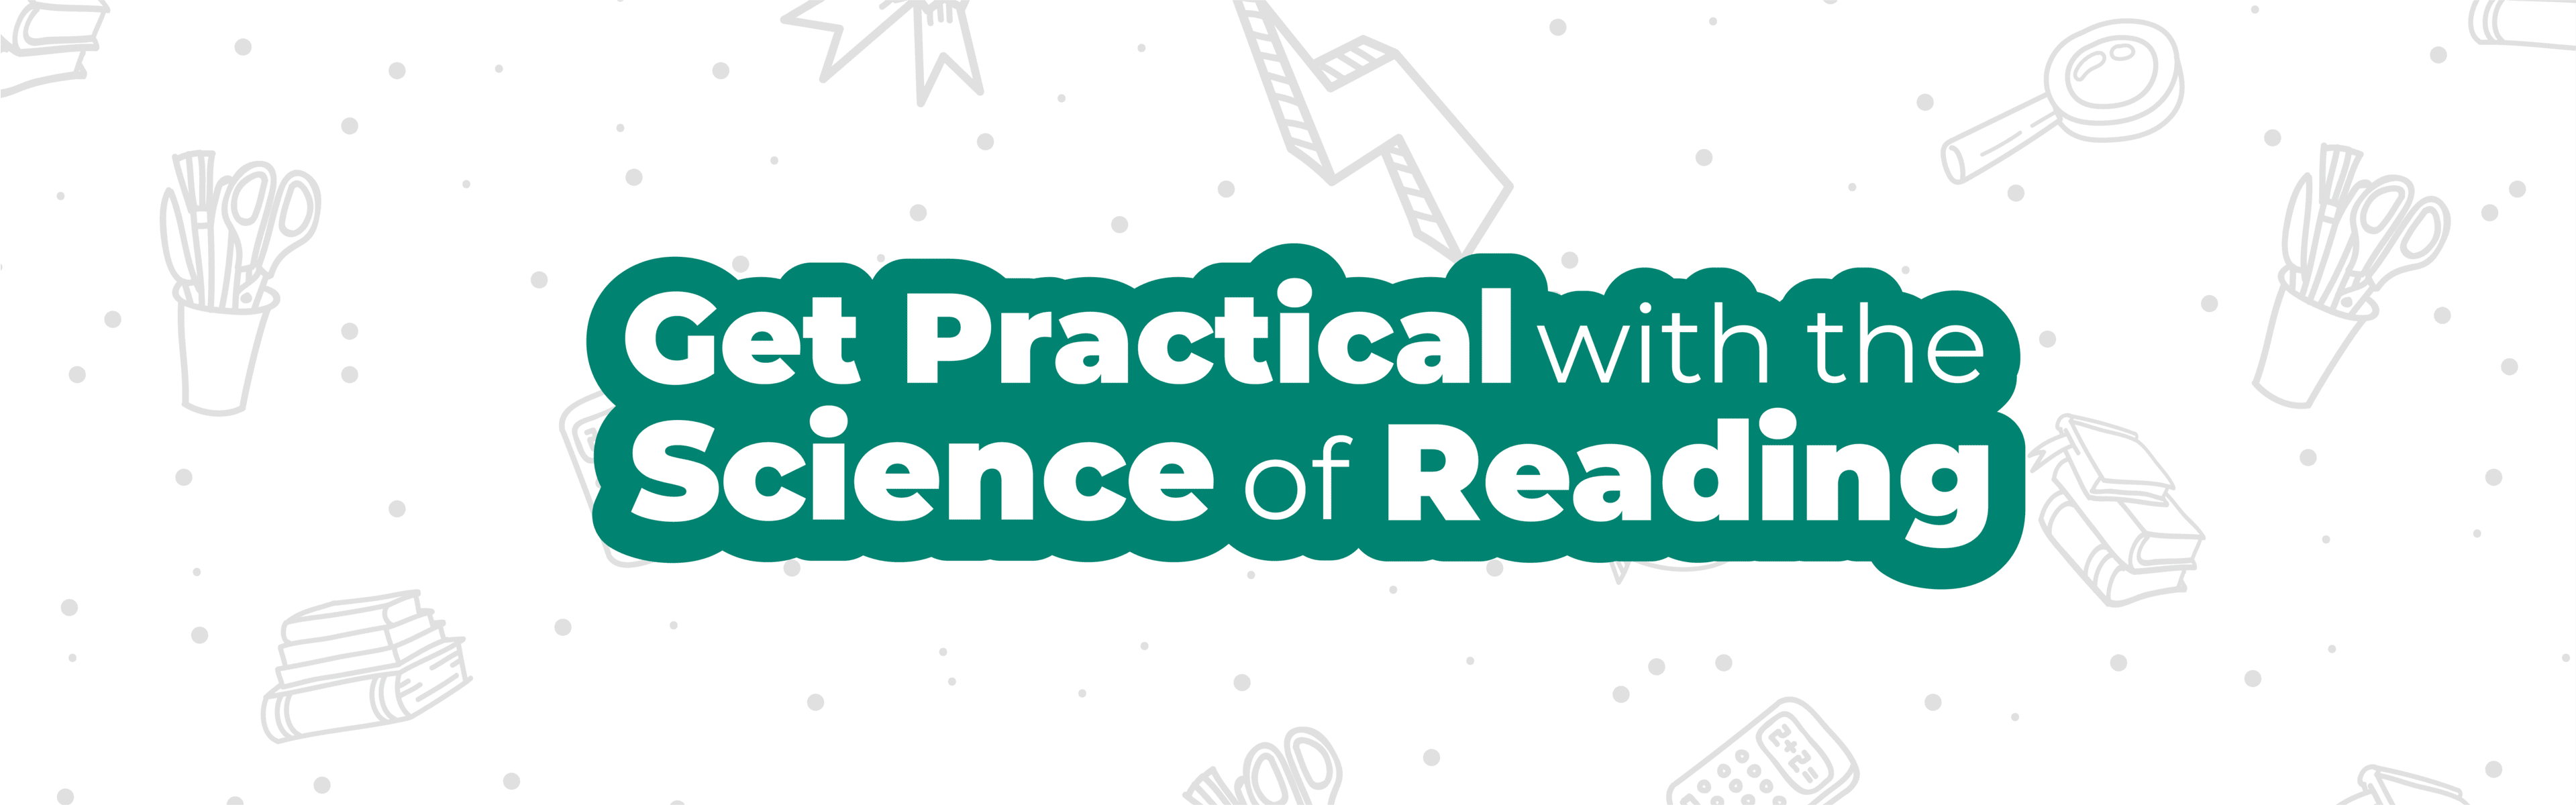 get practical with the science of reading